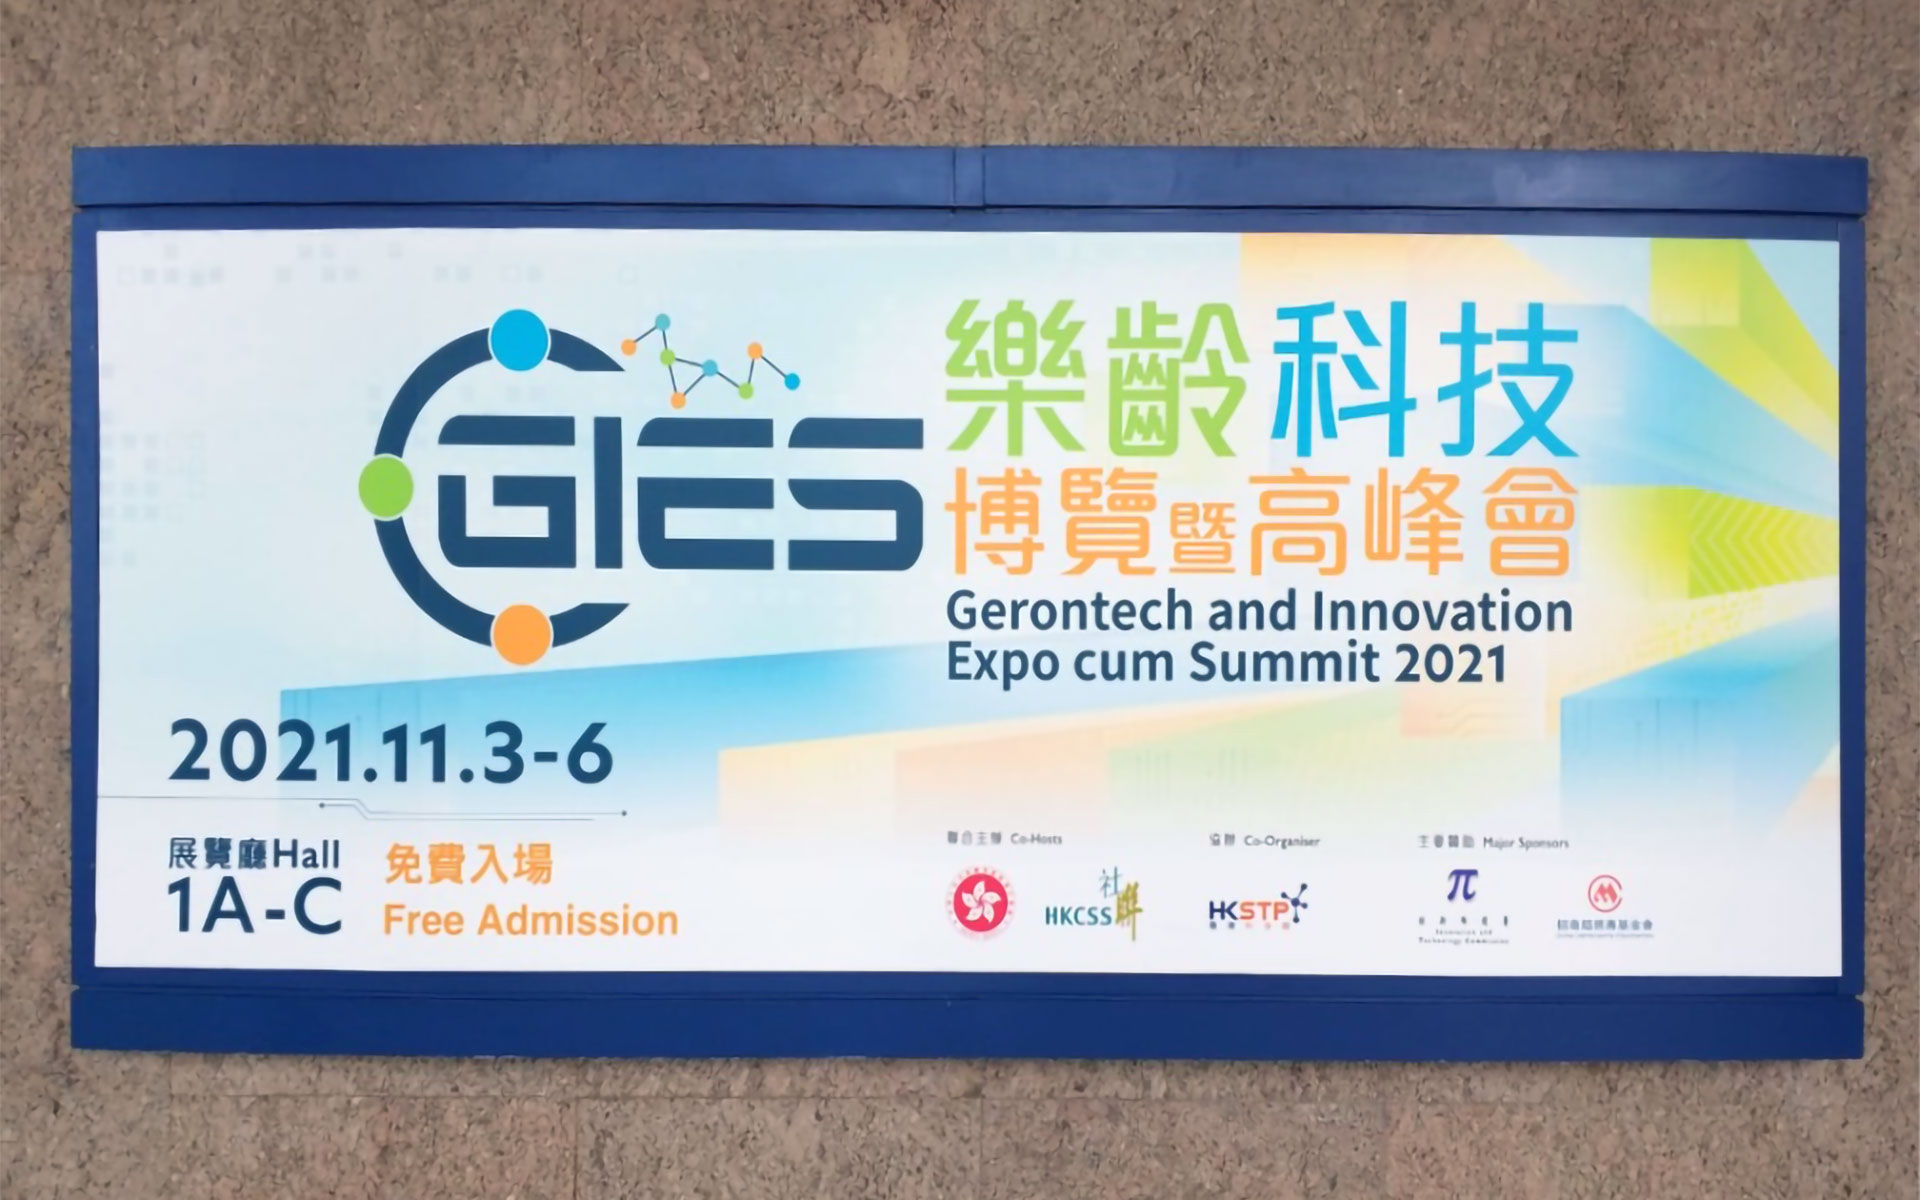 The Gerontech and Innovation Expo cum Summit